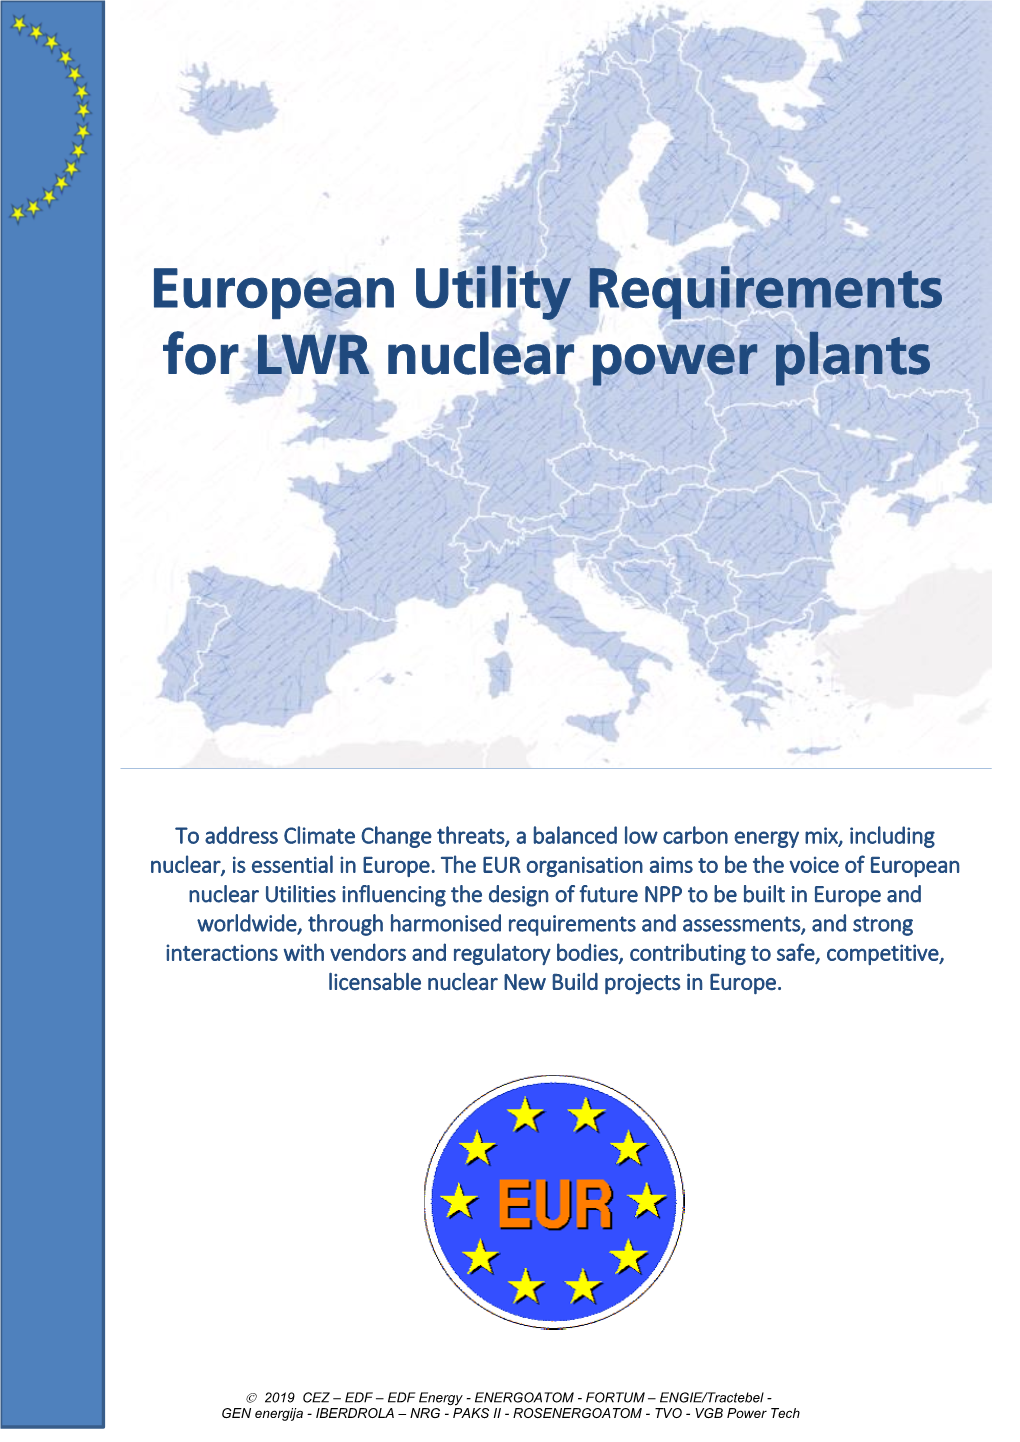 European Utility Requirements for LWR Nuclear Power Plants